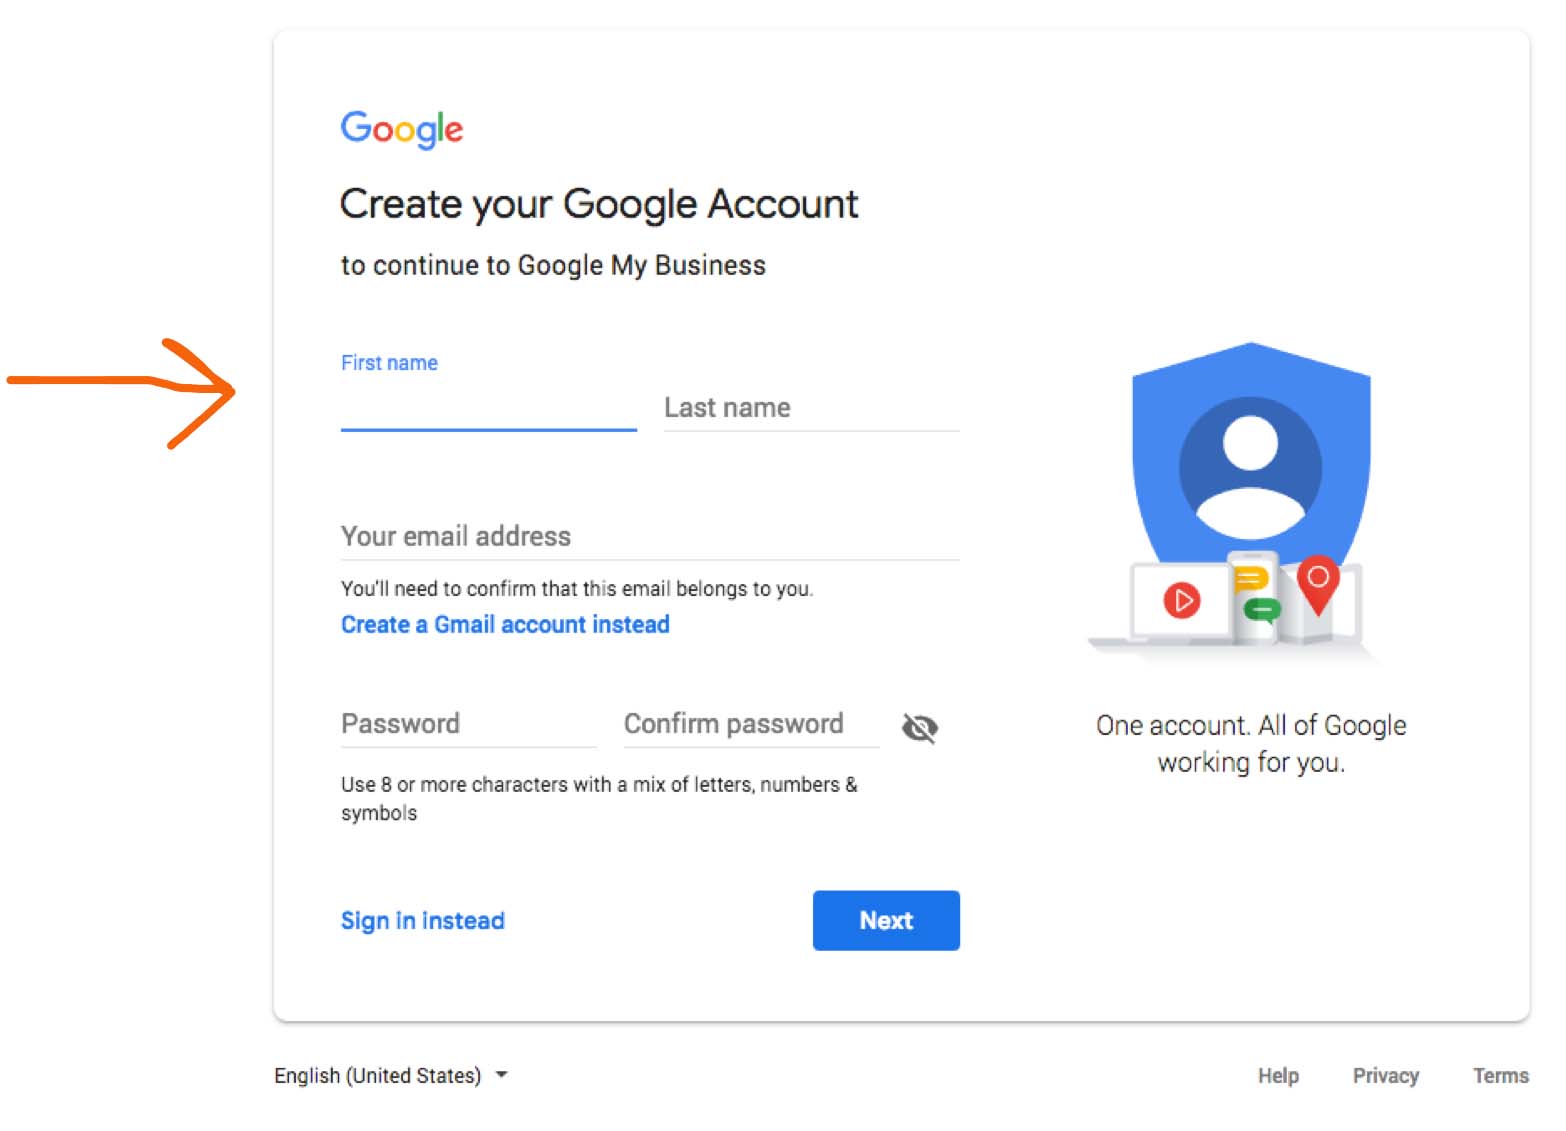 creating-a-google-account-in-spanish-youtube-bank2home